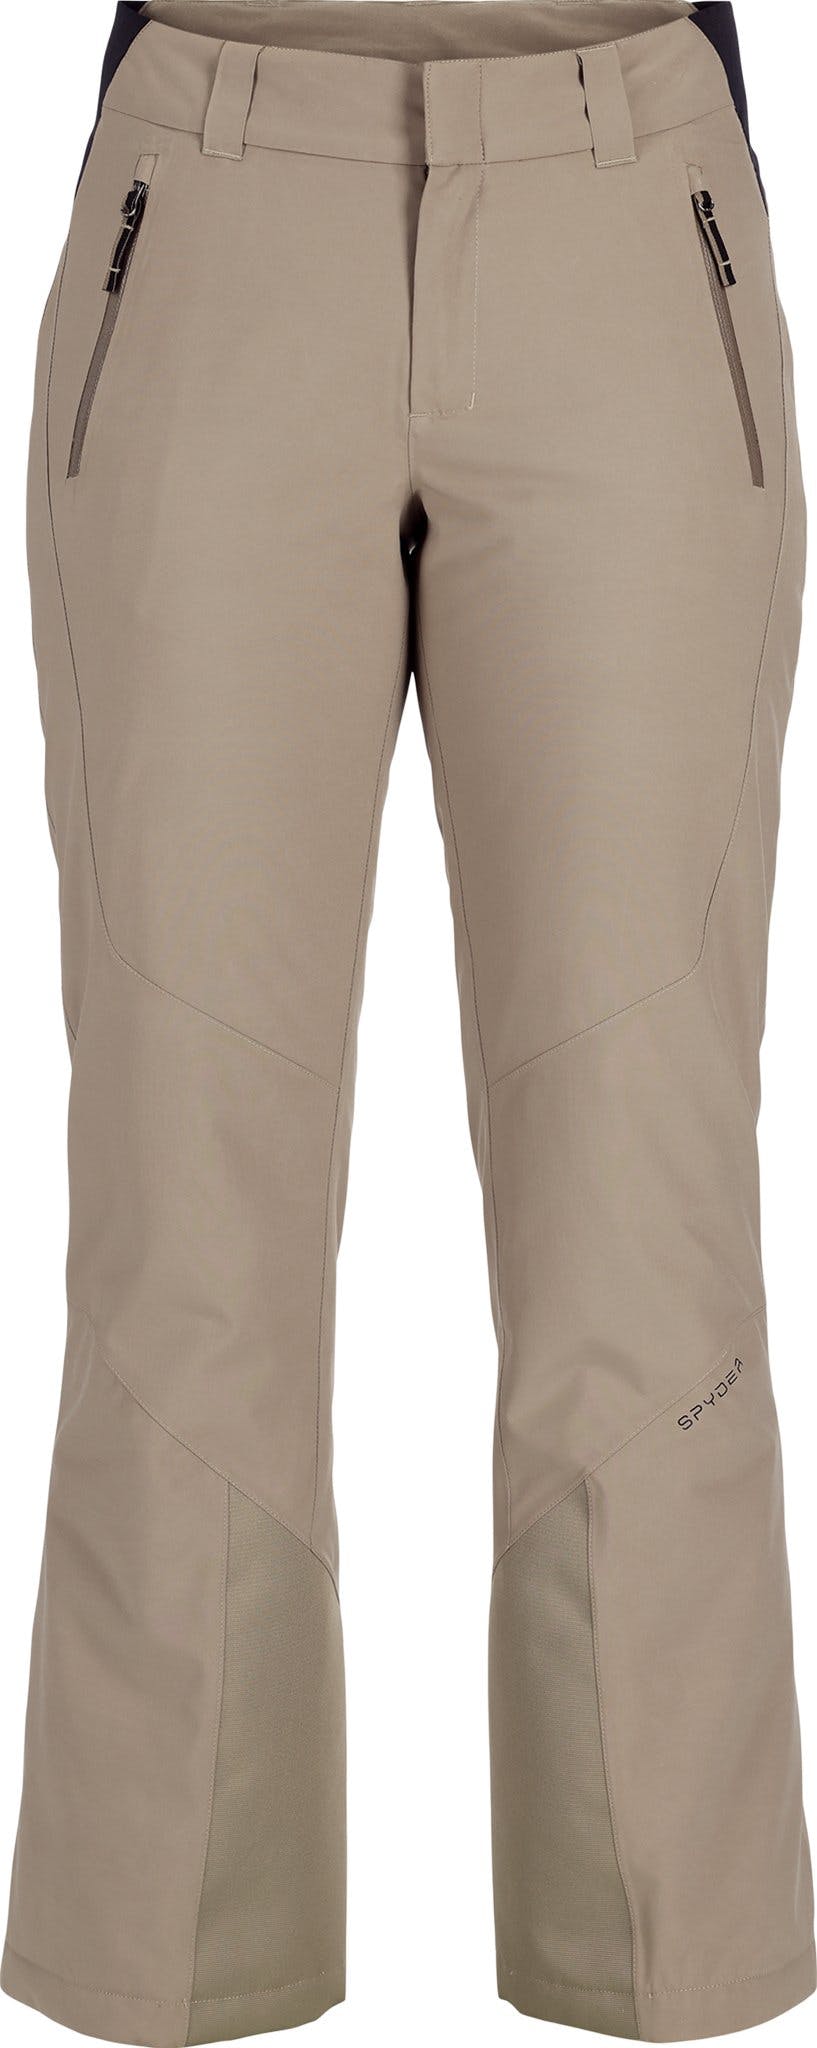 Product image for Winner Insulated Pant - Women's